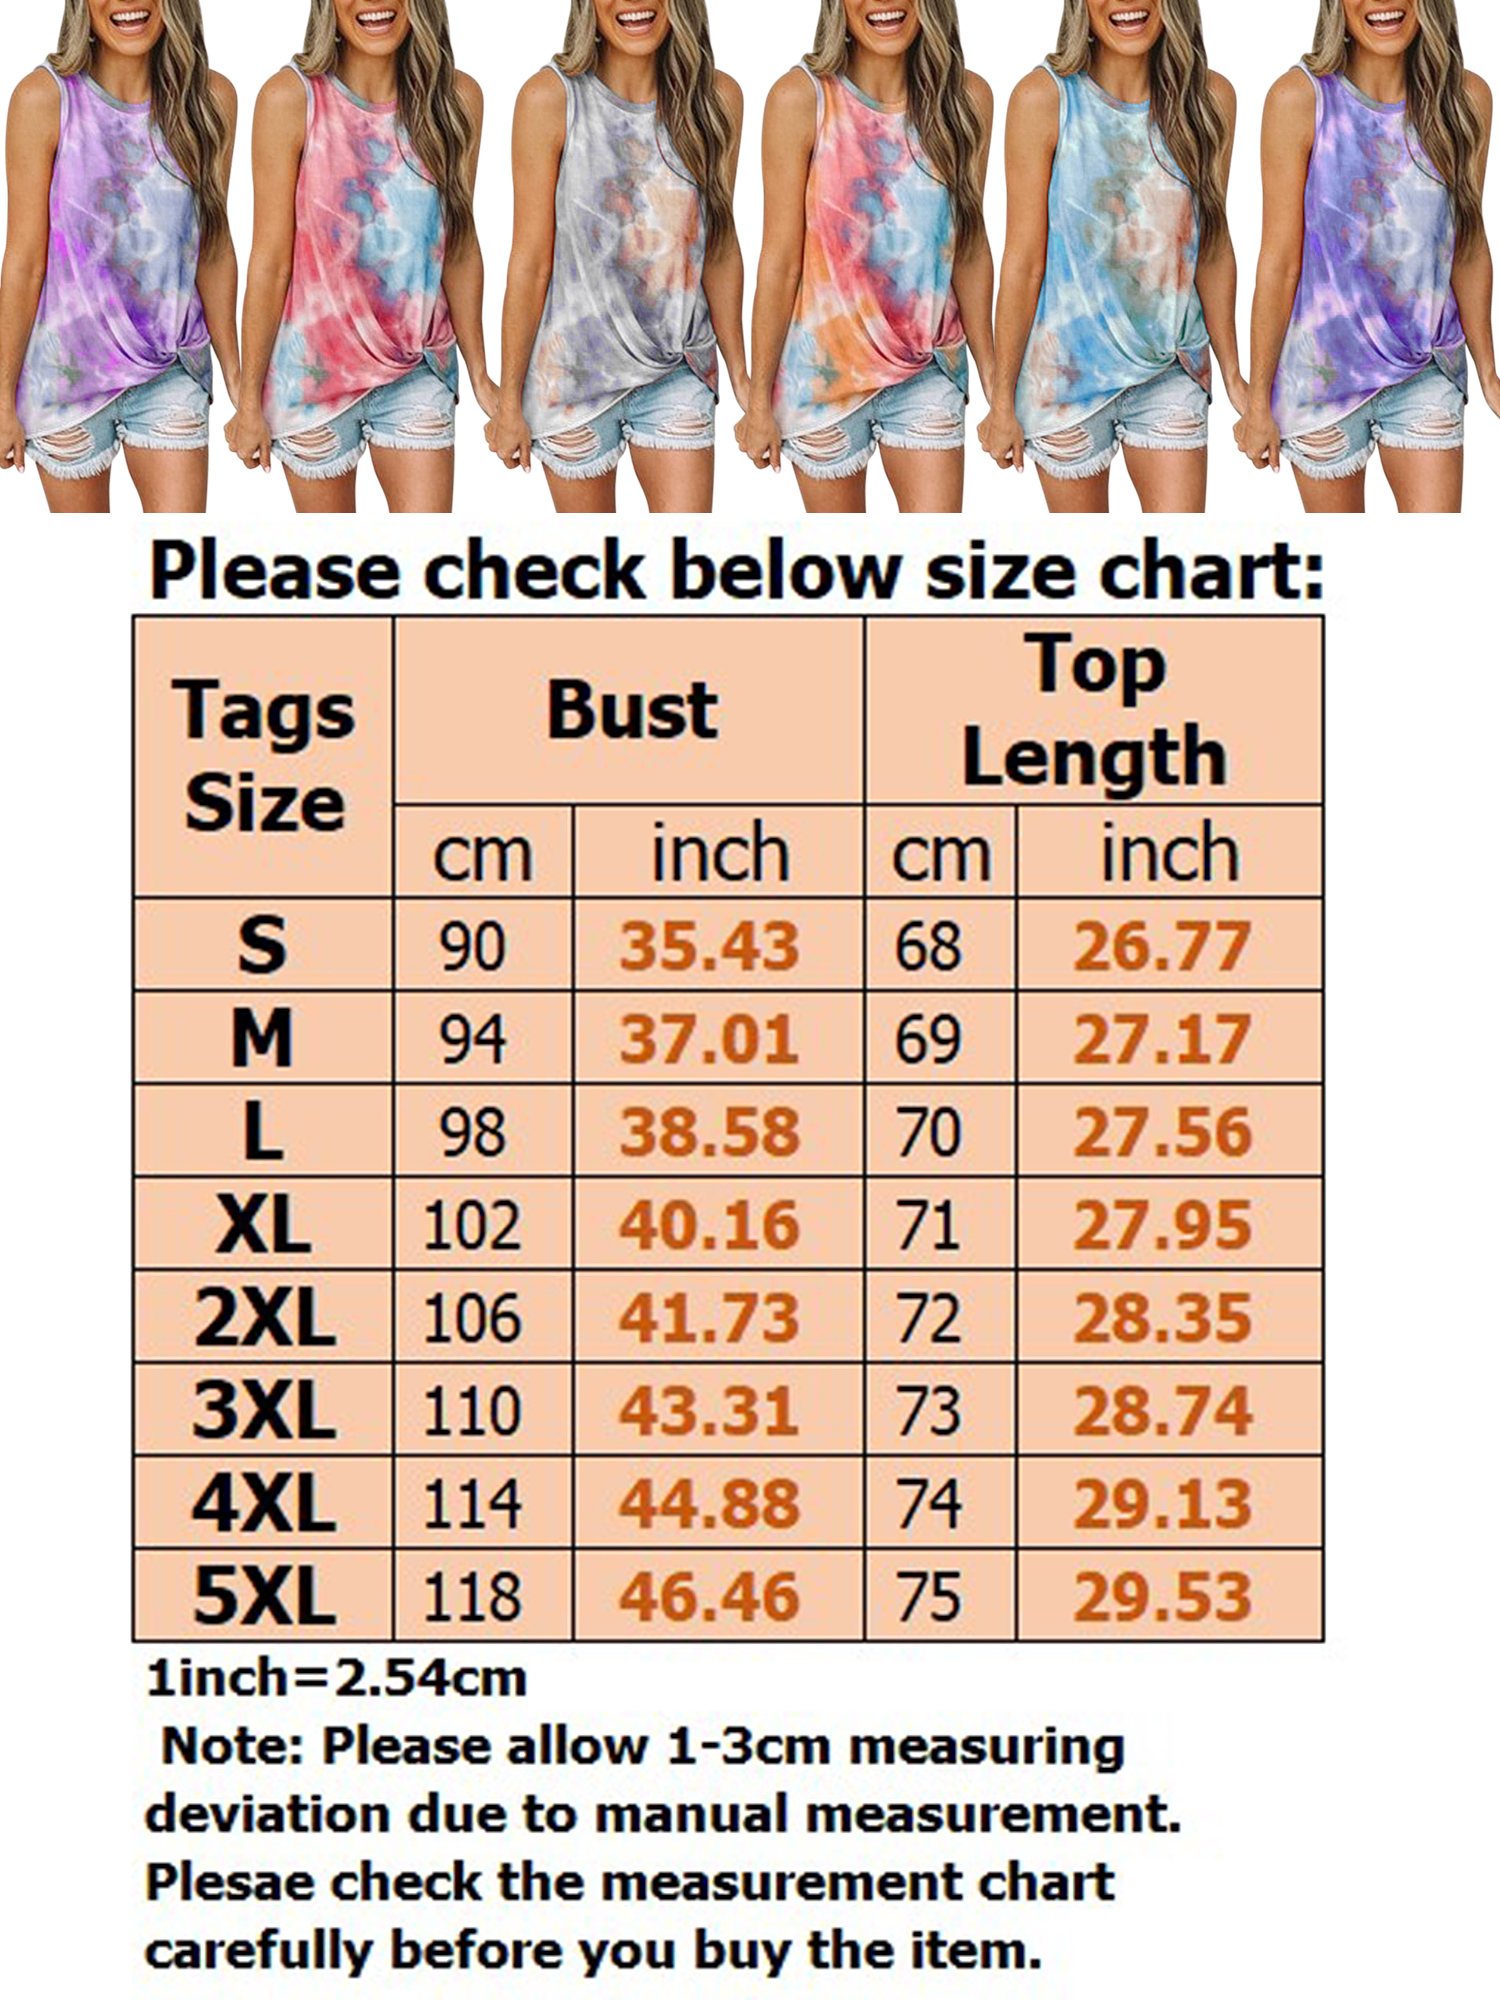 Avamo Summer Casual Women Tie Dye Sleeveless Top Tie Front Tank Tops Vest Blouse Tee Shirts Plus Size S-5XL - image 2 of 3